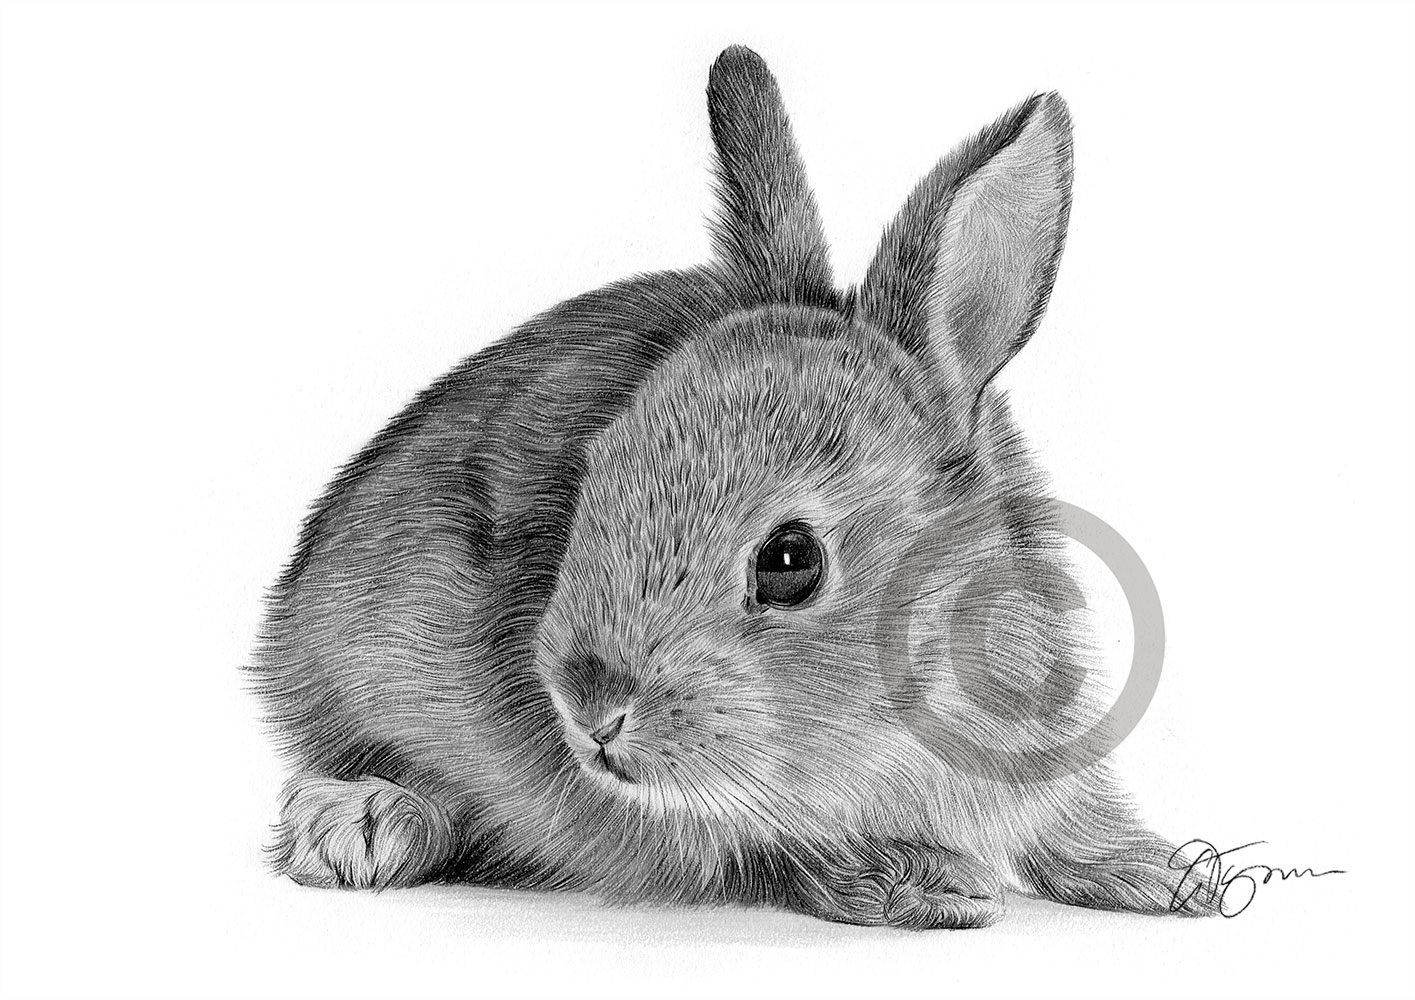 Pencil drawing of a rabbit in landscape by artist Gary Tymon